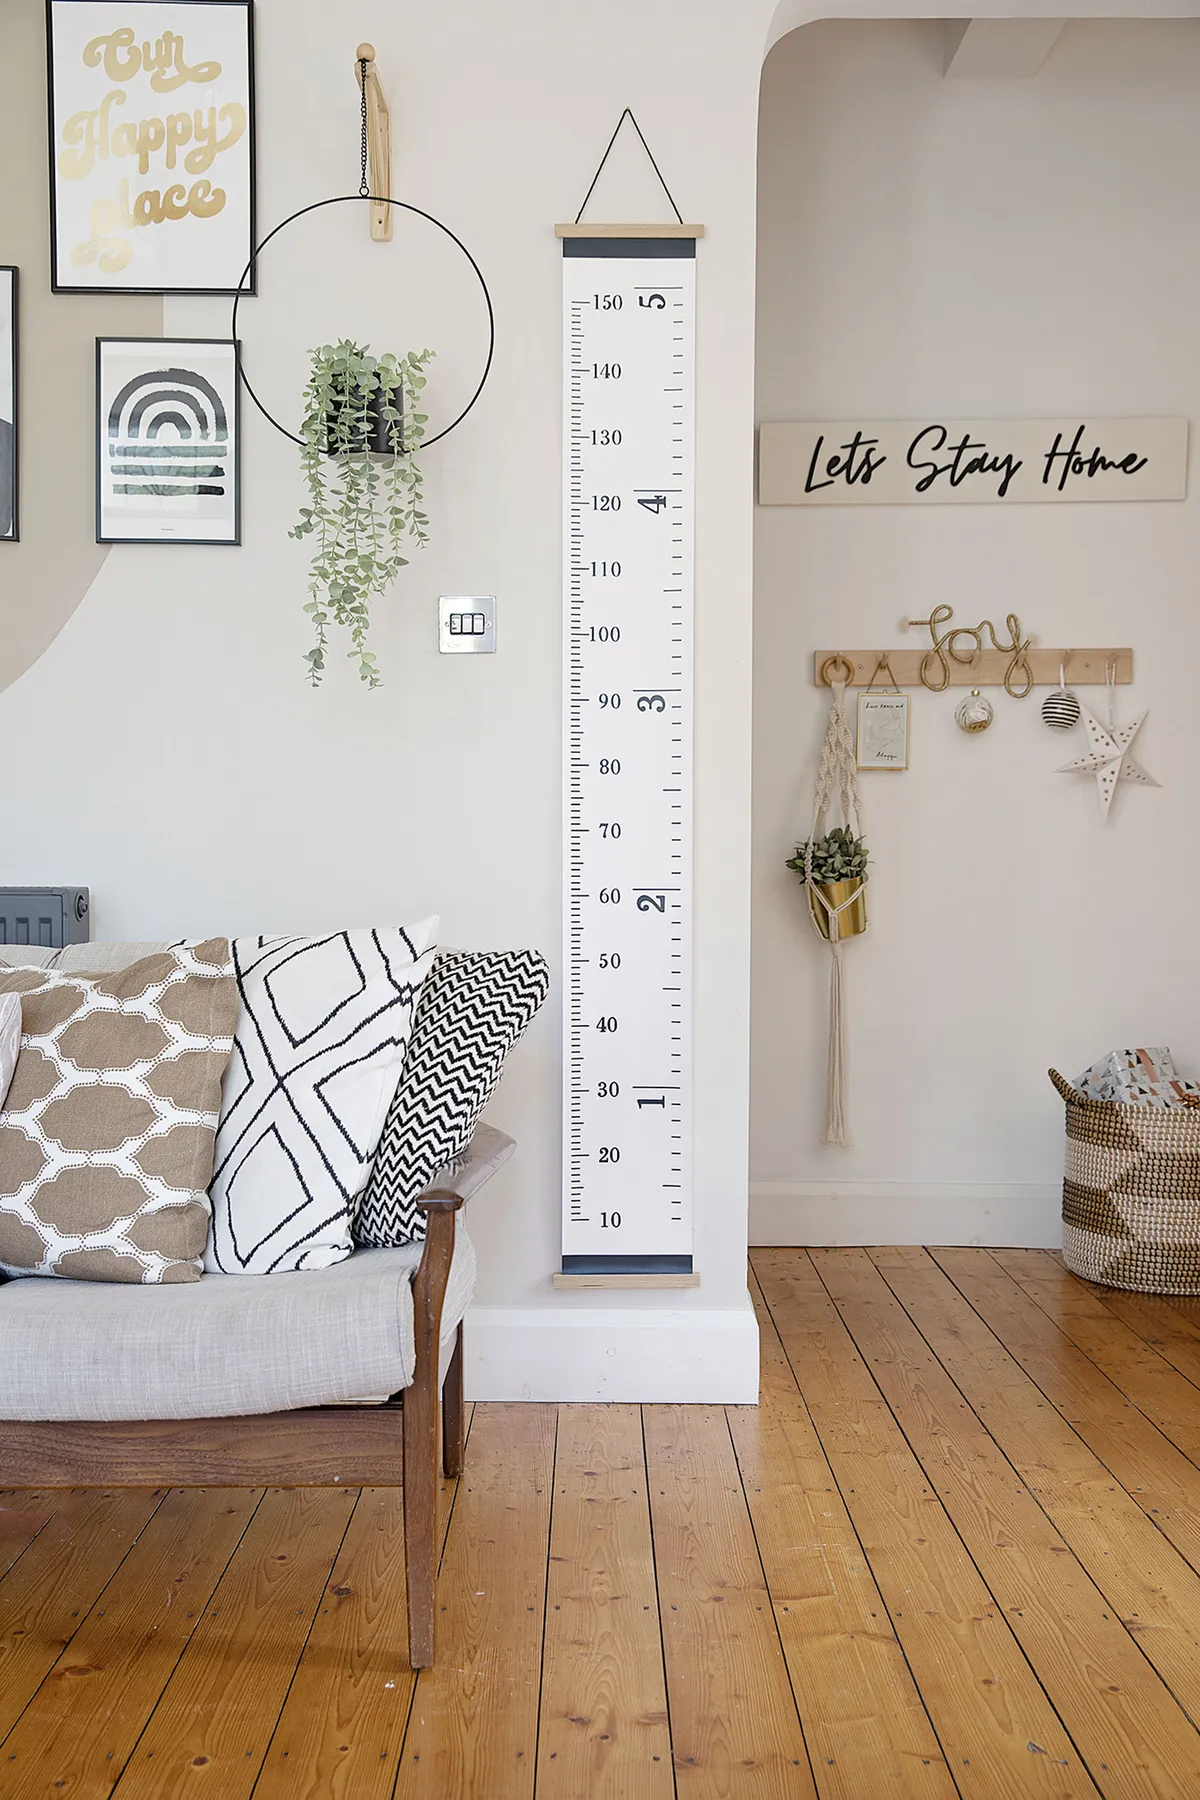 Next to the giant height ruler from H&M Home, Louise has adapted a Sainsbury’s metal plant hanger by attaching a bracket from B&Q. ’My friend’s husband – who owns White Attic Design – made the Let’s Stay Home sign,’ Louise recalls. ‘Who knew it would become so apt in 2020!’